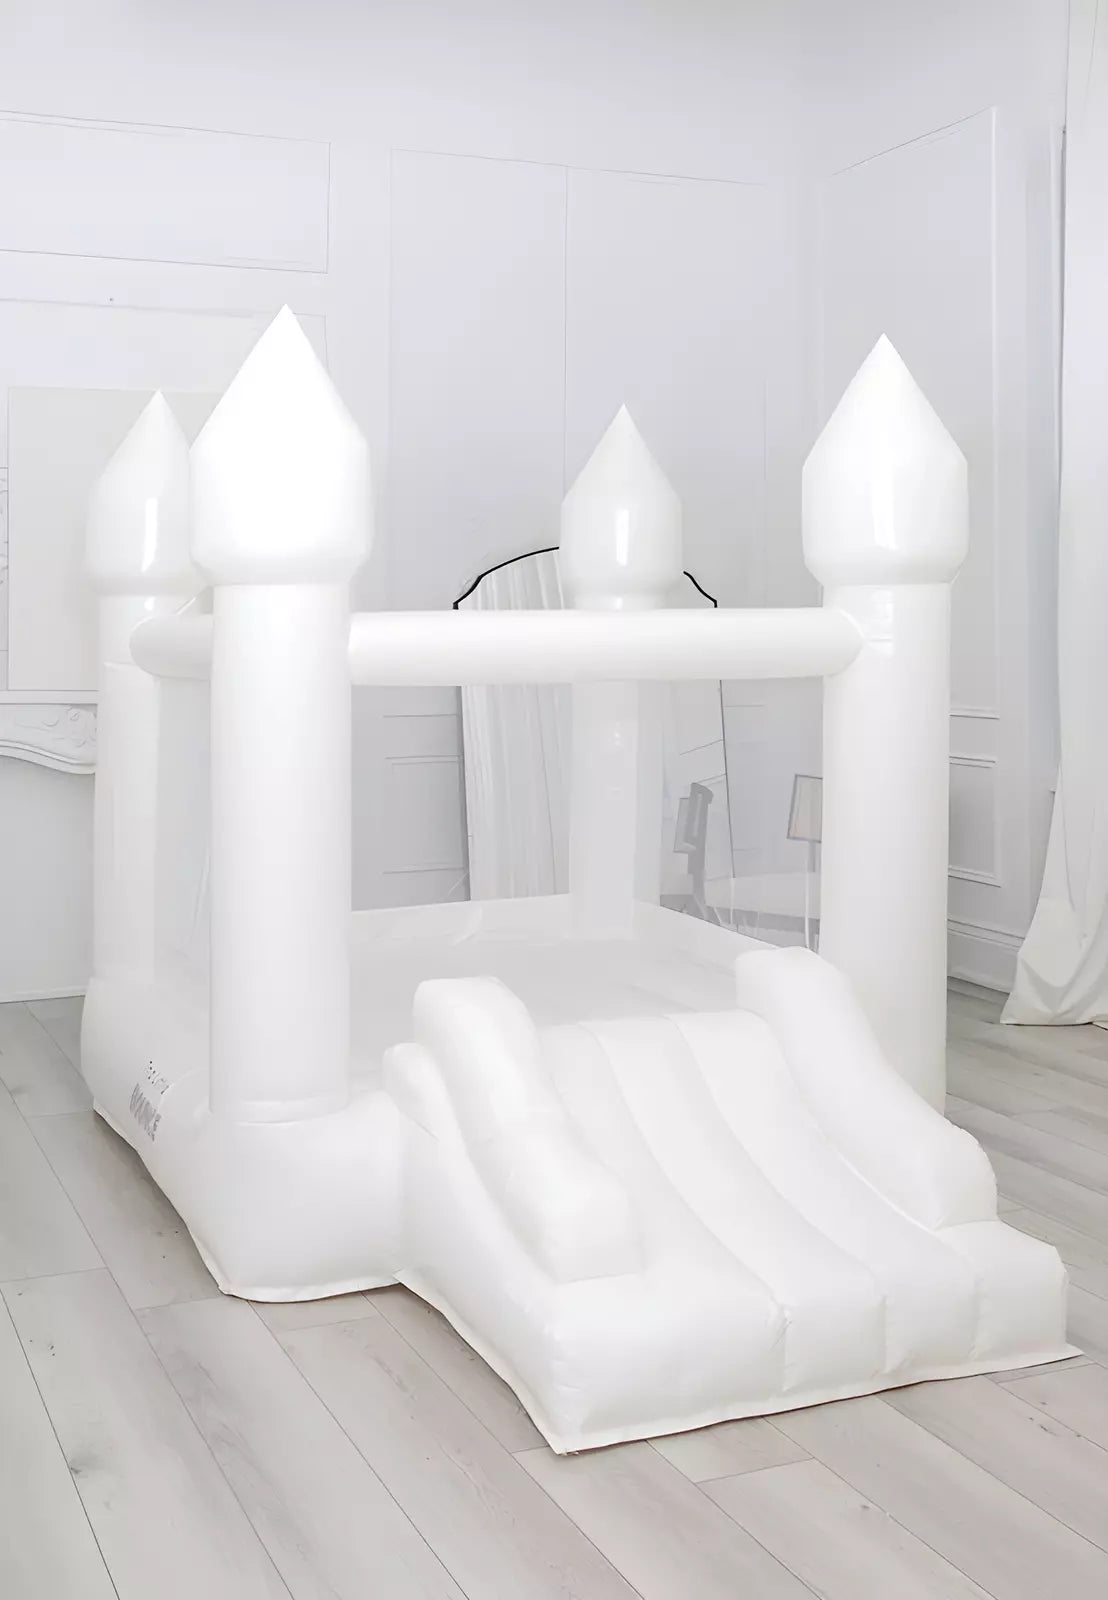 The Little Bounce, small white bounce house, placed inside a living room